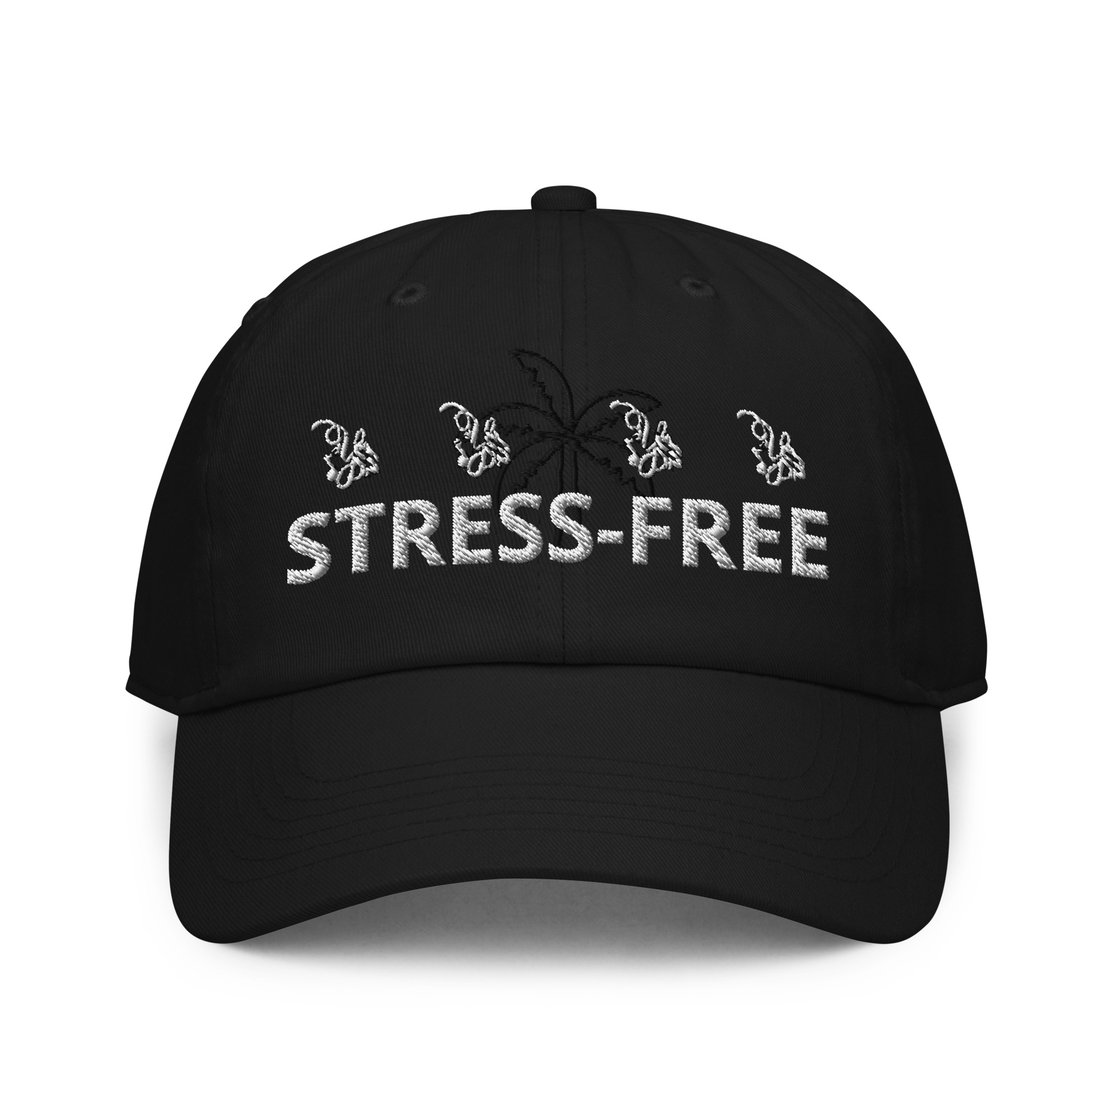 Image of Stress-Free Exclusive Fitted baseball cap